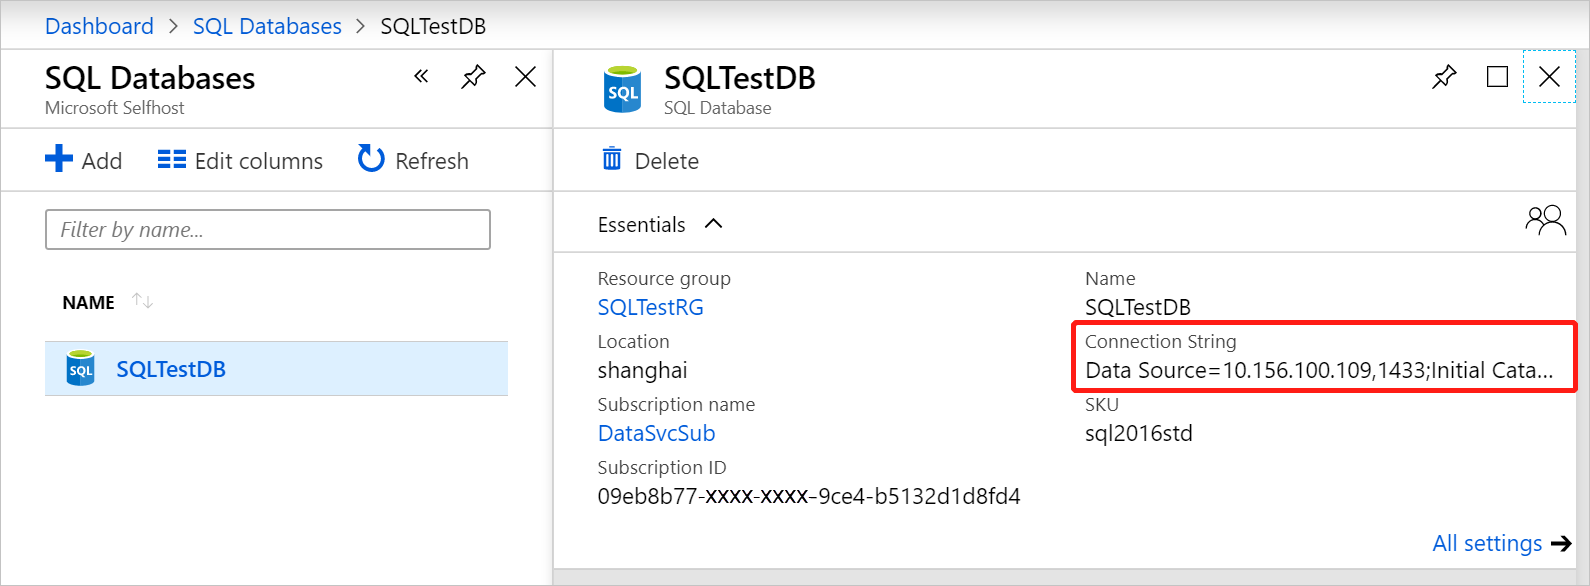 Retrieve the connection string for the SQL Server database